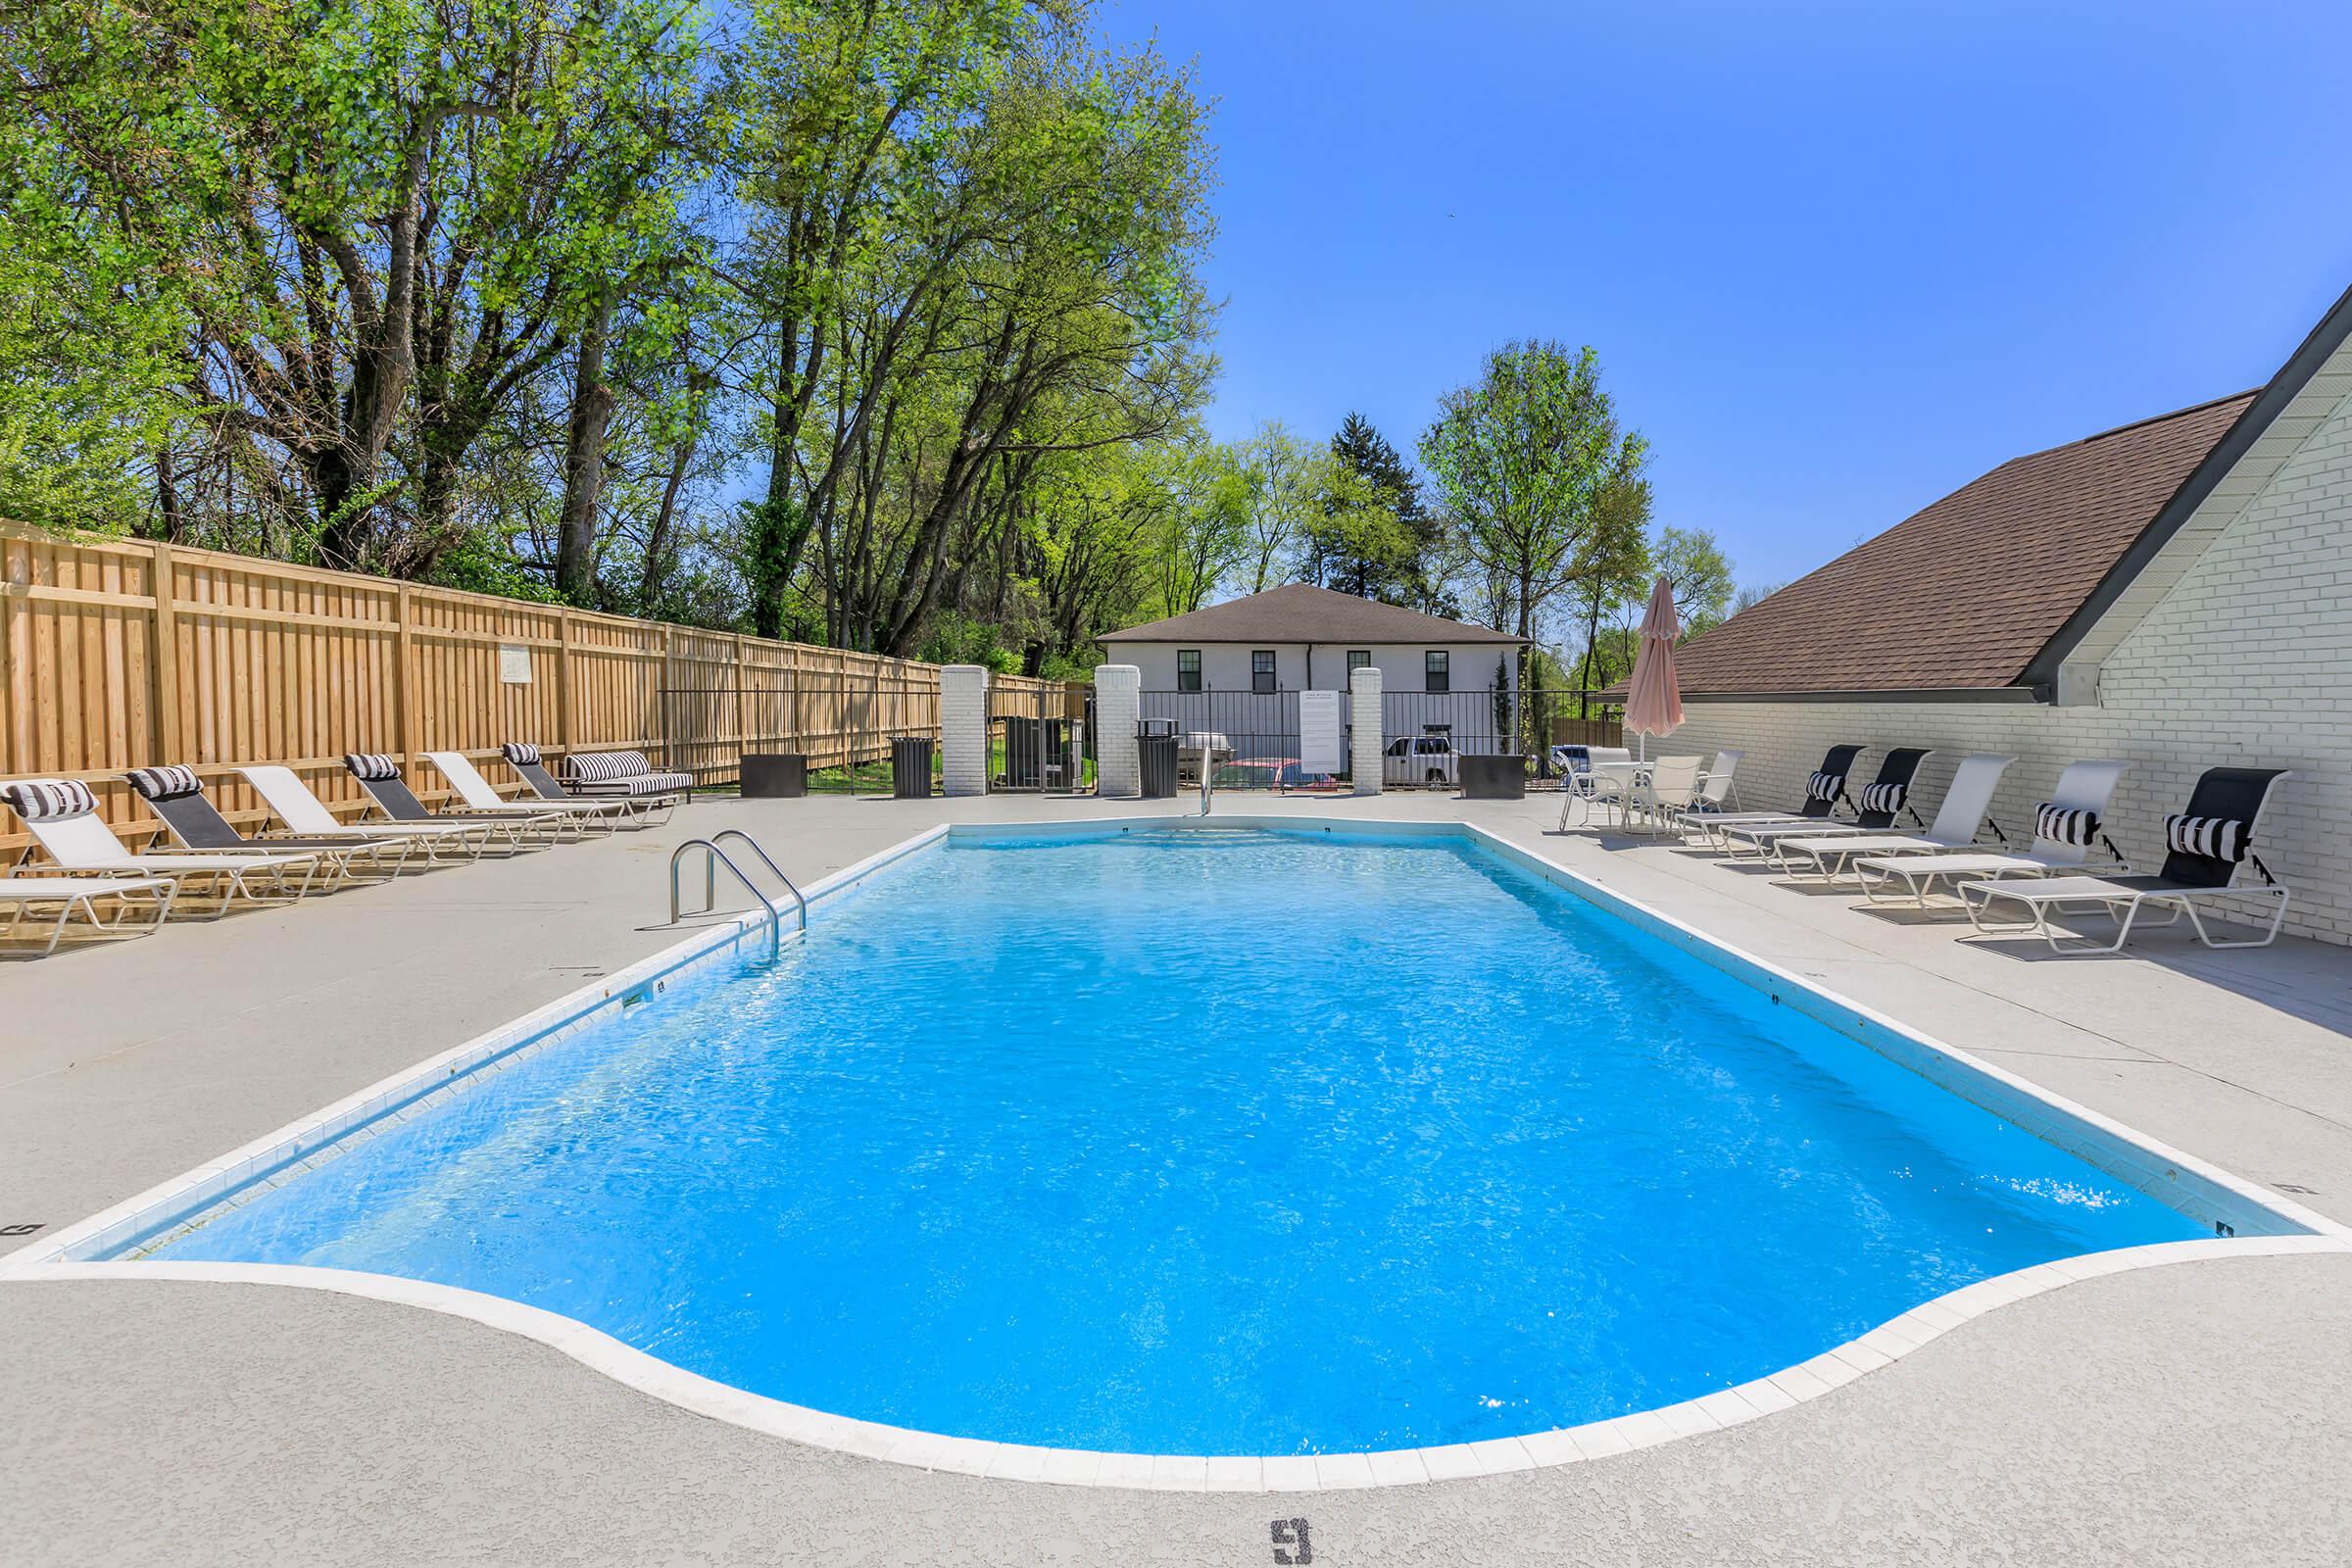 The Roosevelt Apartment Home apartments' in Murfreesboro, Tennessee shimmering swimming pool.